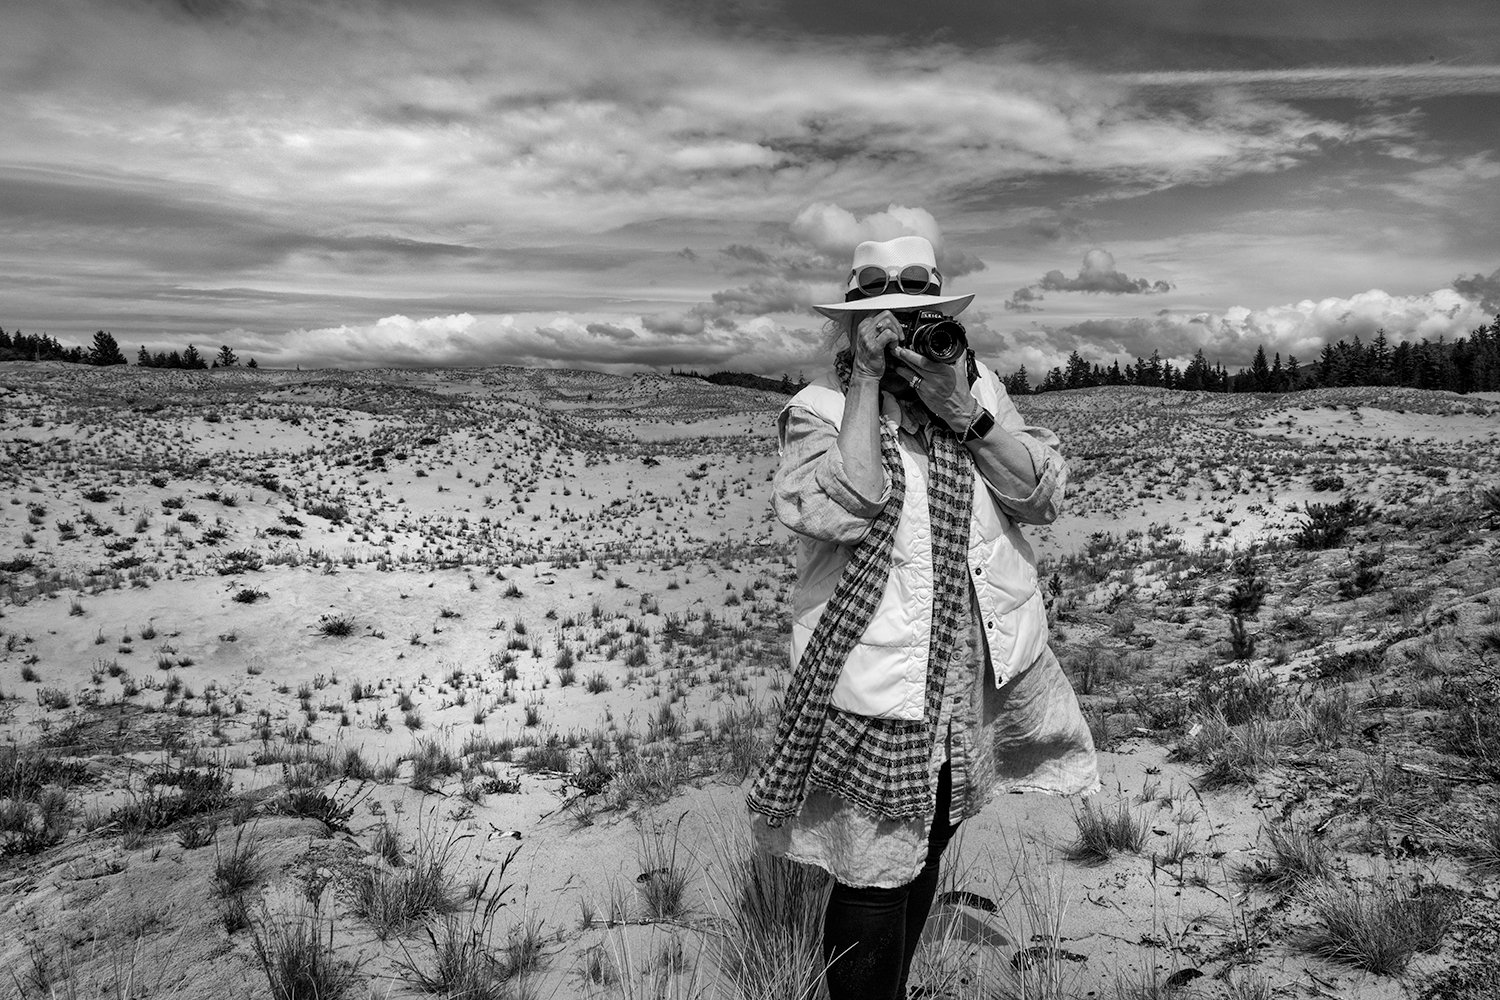 Claudia-Toutain-Dorbec-multimedia-artist-photographing-the-Sand-Lake-dunes-in-Oregon-USA.jpg